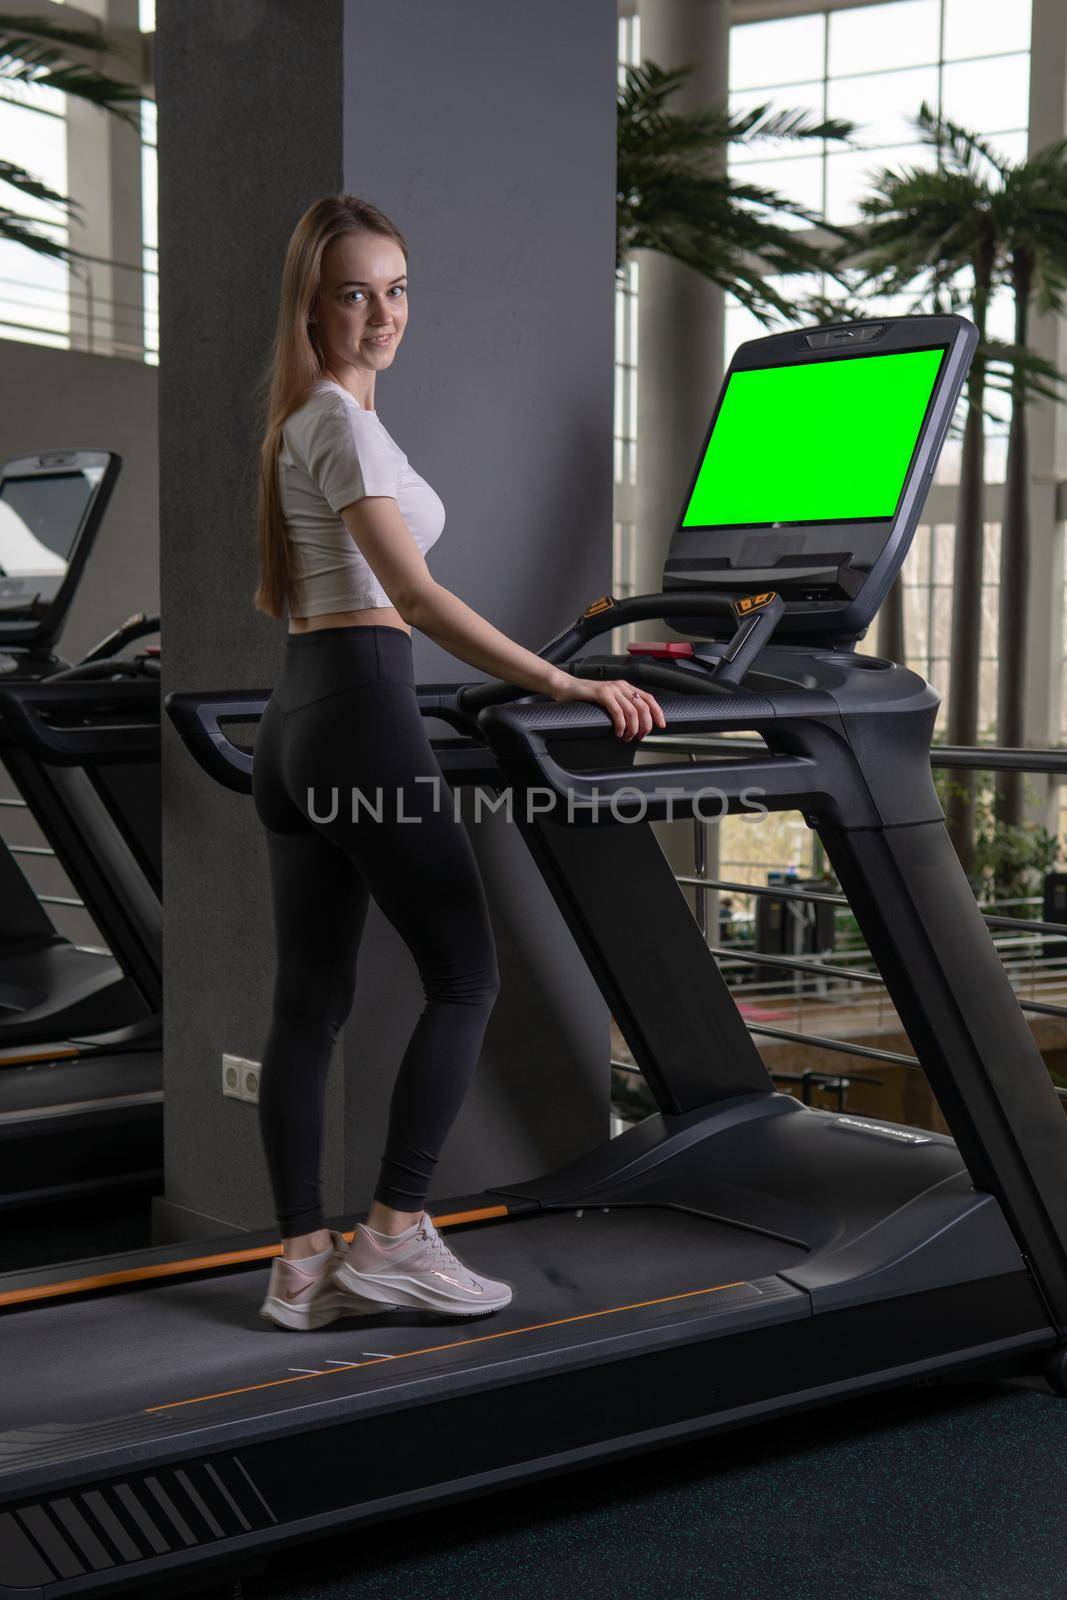 Indoors young treadmill length woman profile full exercise female, concept healthy lifestyle workout attractive in person and adult sporty, muscles together. White run group, green screen by 89167702191